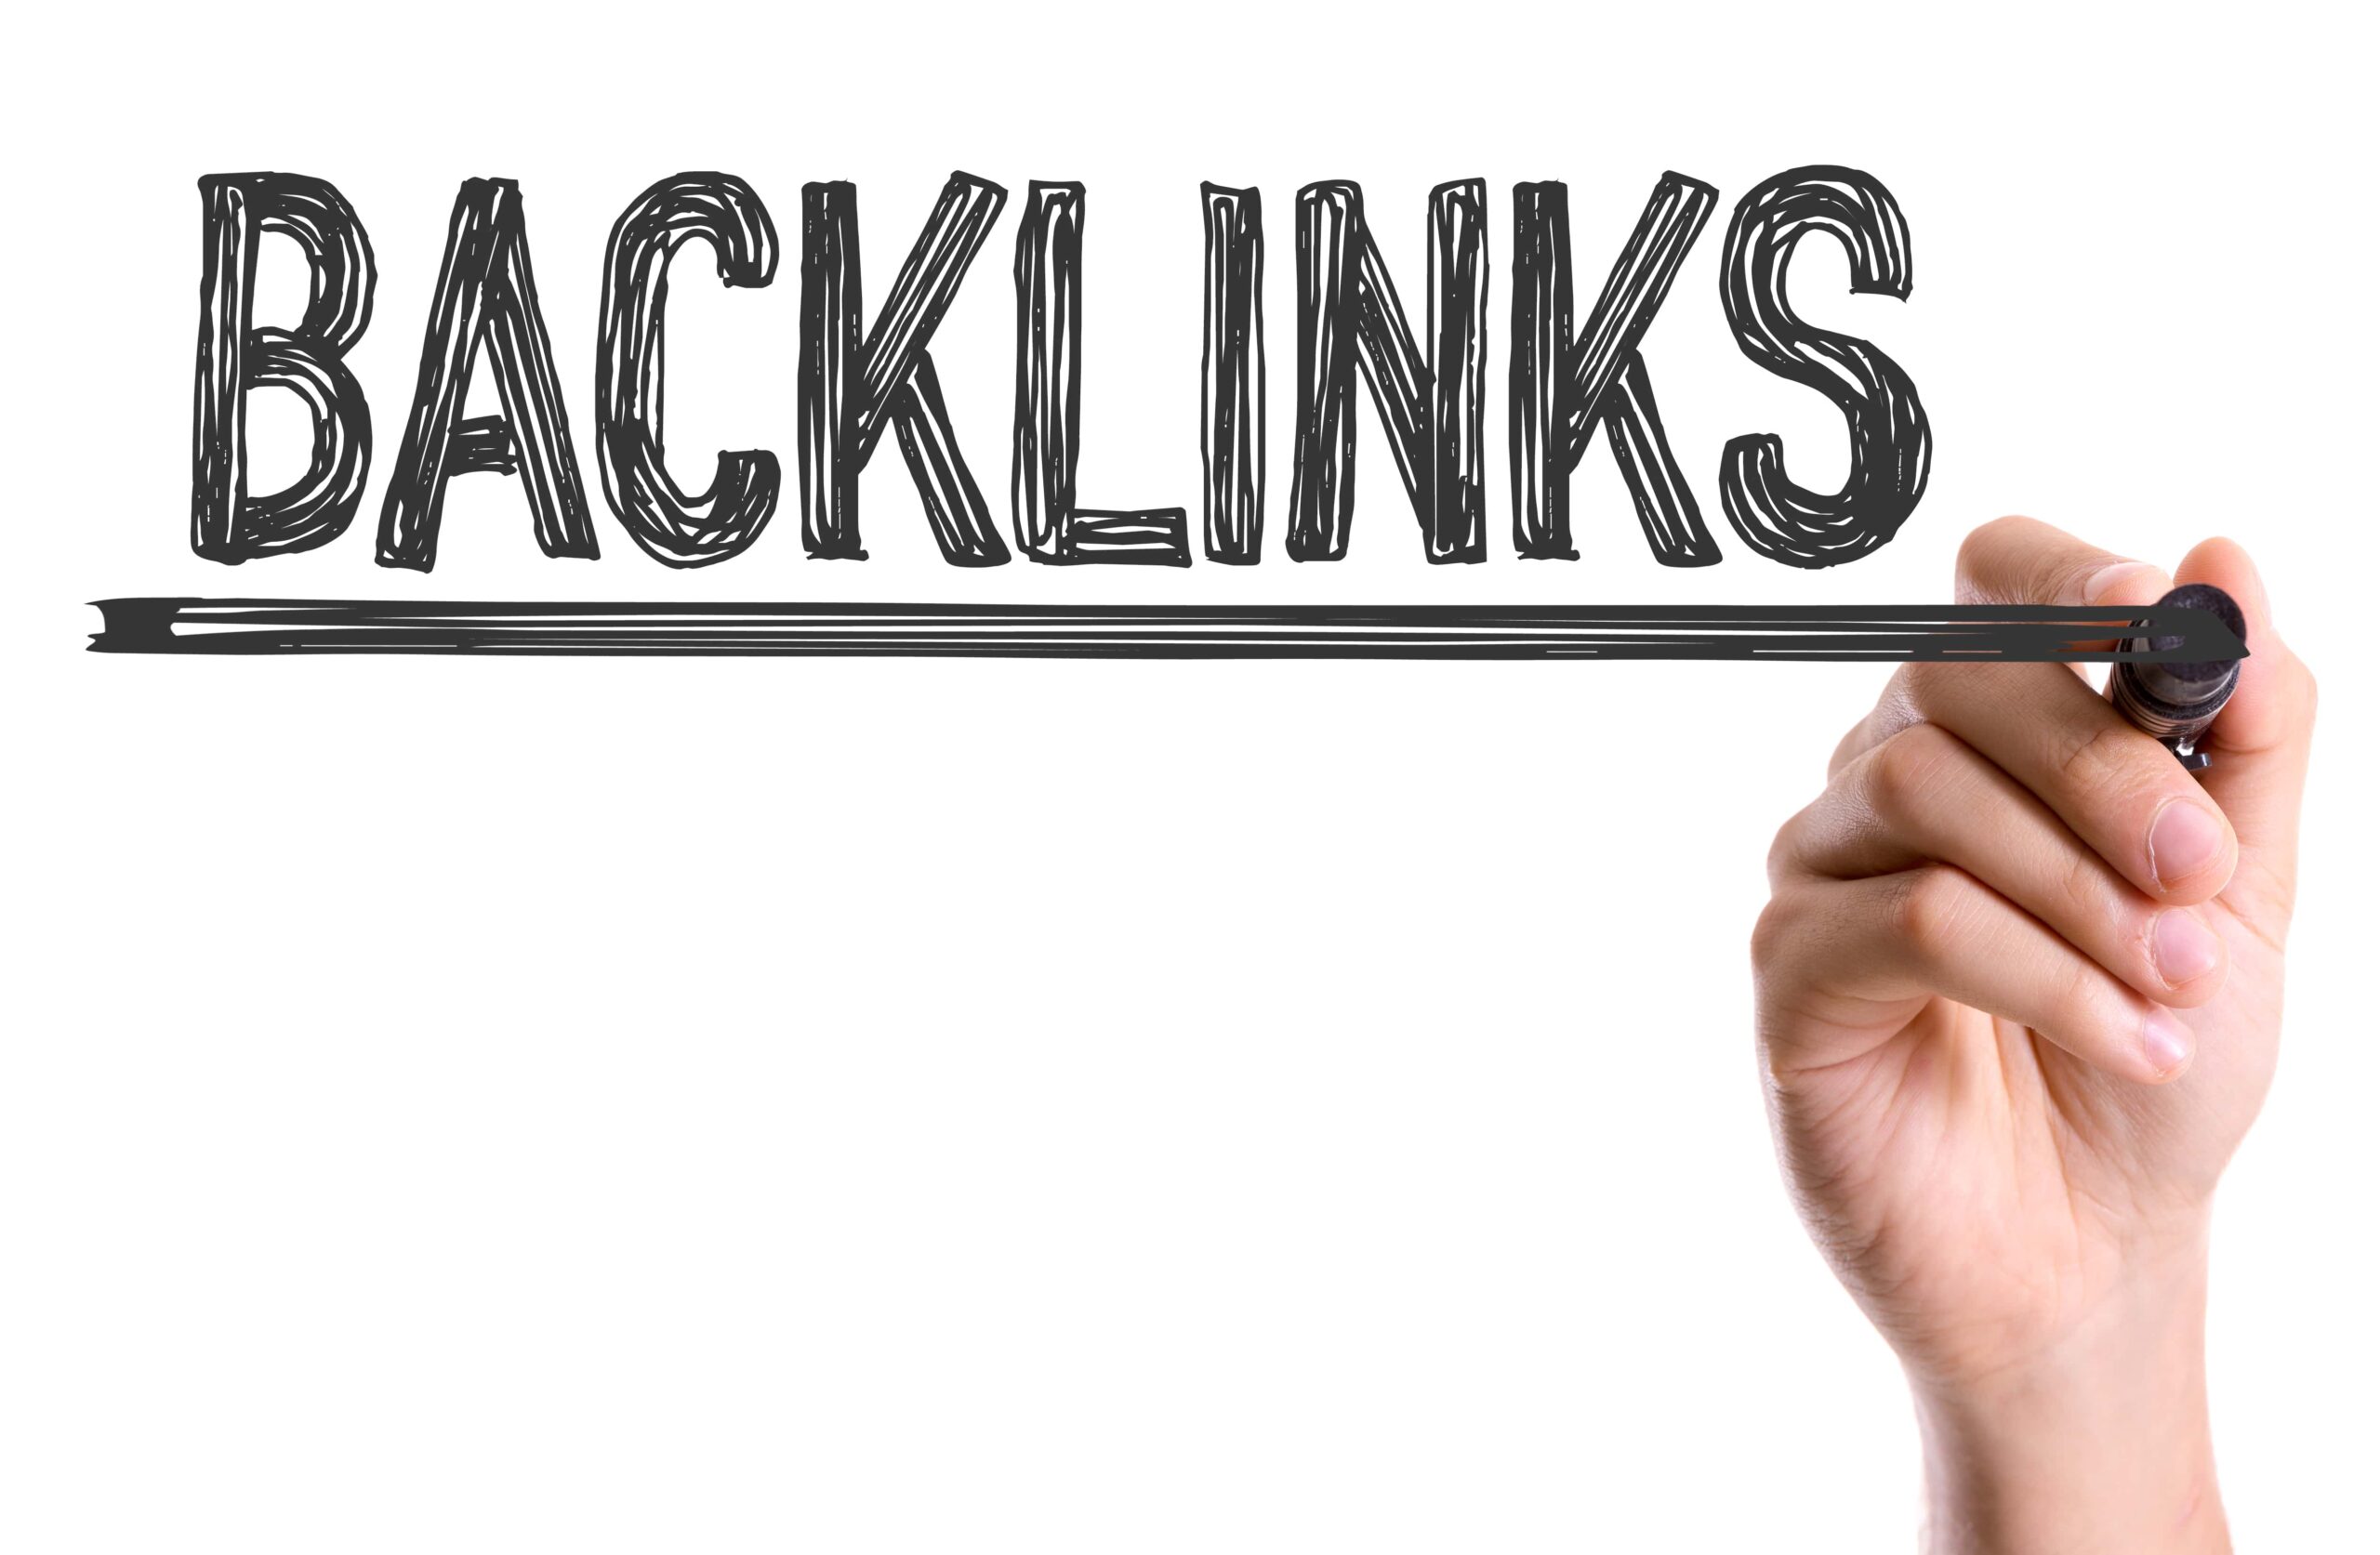 Ali Pourvasei, of LAD Solutions, was Recently Interviewed About What He Thinks is the Most Important Thing to Look Out for in a Backlink